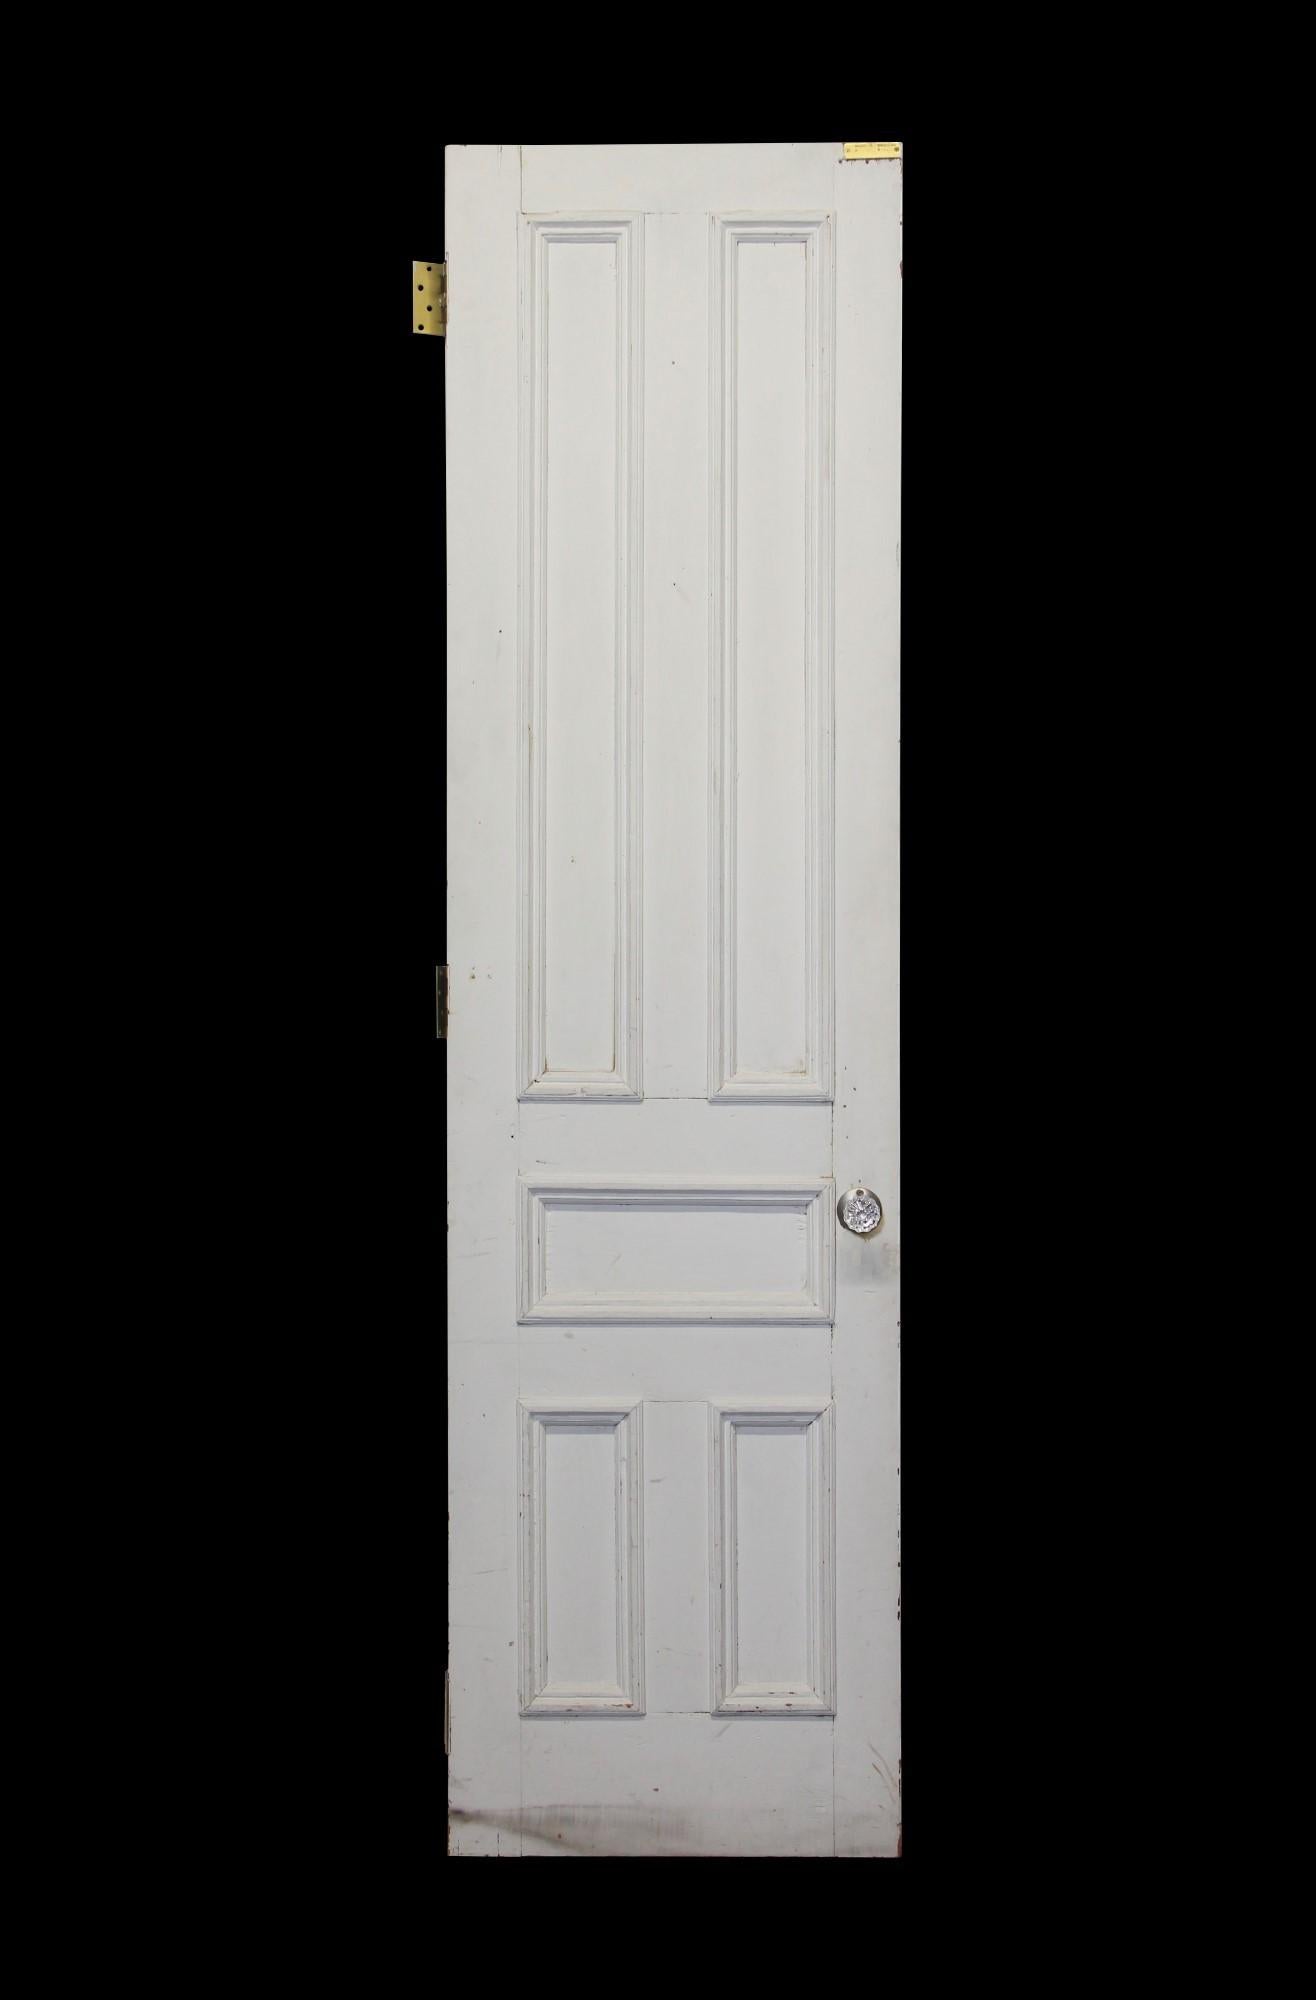 Early 20th century antique white painted wood door done in a five panel deign . Features glass doorknobs and brass hardware. Measures: 94.5 x 25.25. Small quantity available at time of posting. Priced each. Please inquire. Please note, this item is